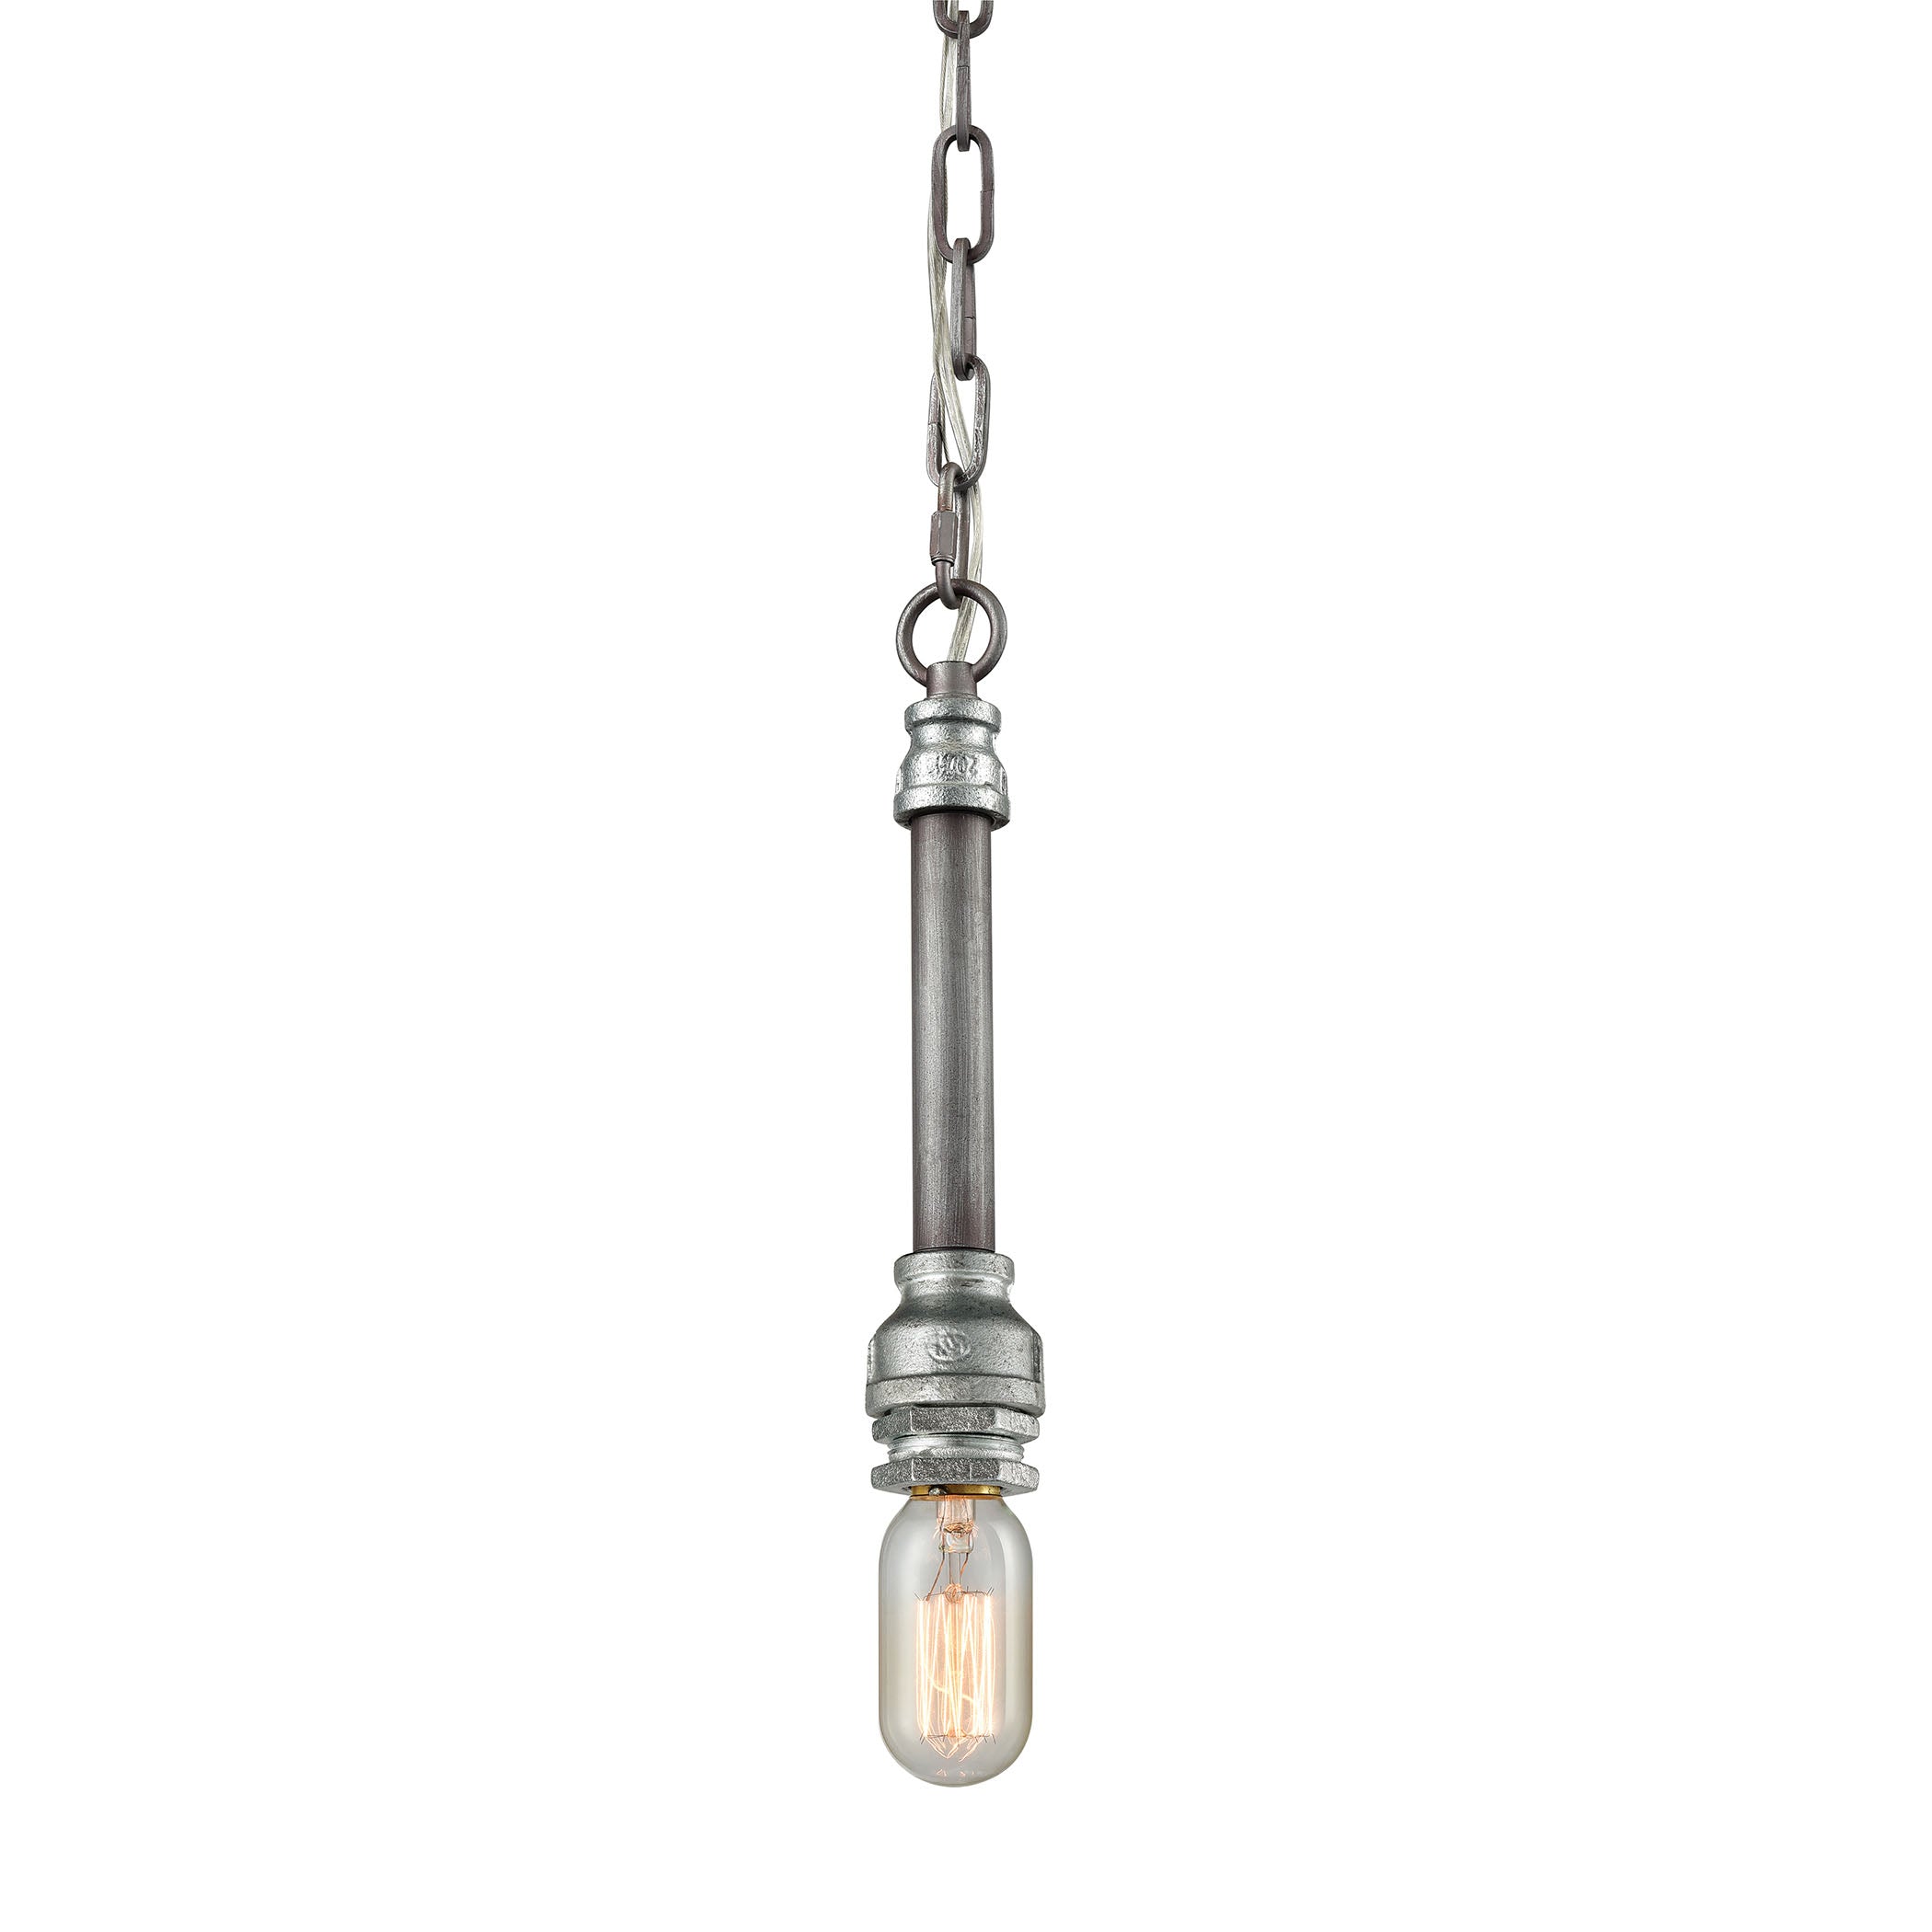 ELK Lighting 10688/1 Cast Iron Pipe 1-Light Mini Pendant in Weathered Zinc (Optional Shades Available)